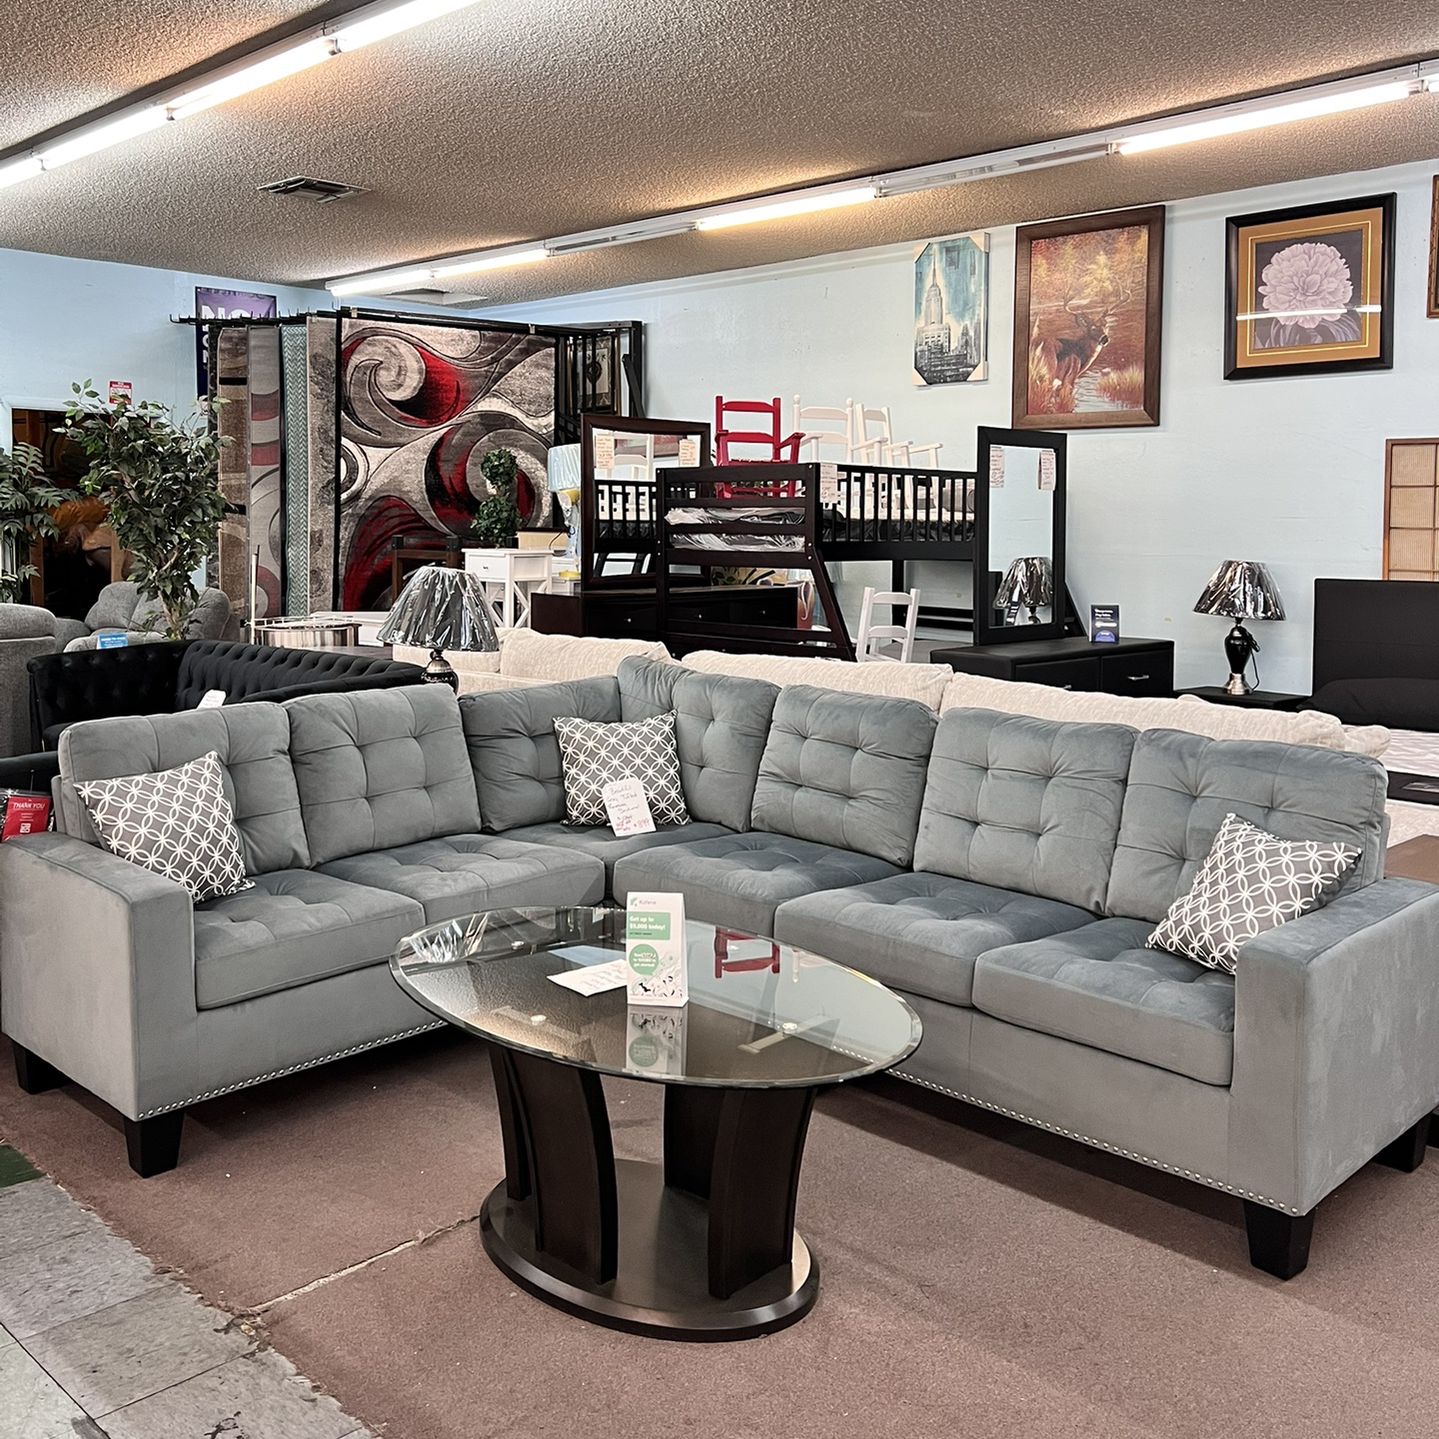 🔥Hot Deal🔥Brand New Sectional Couch $799, Delivery Available, Finance Available 